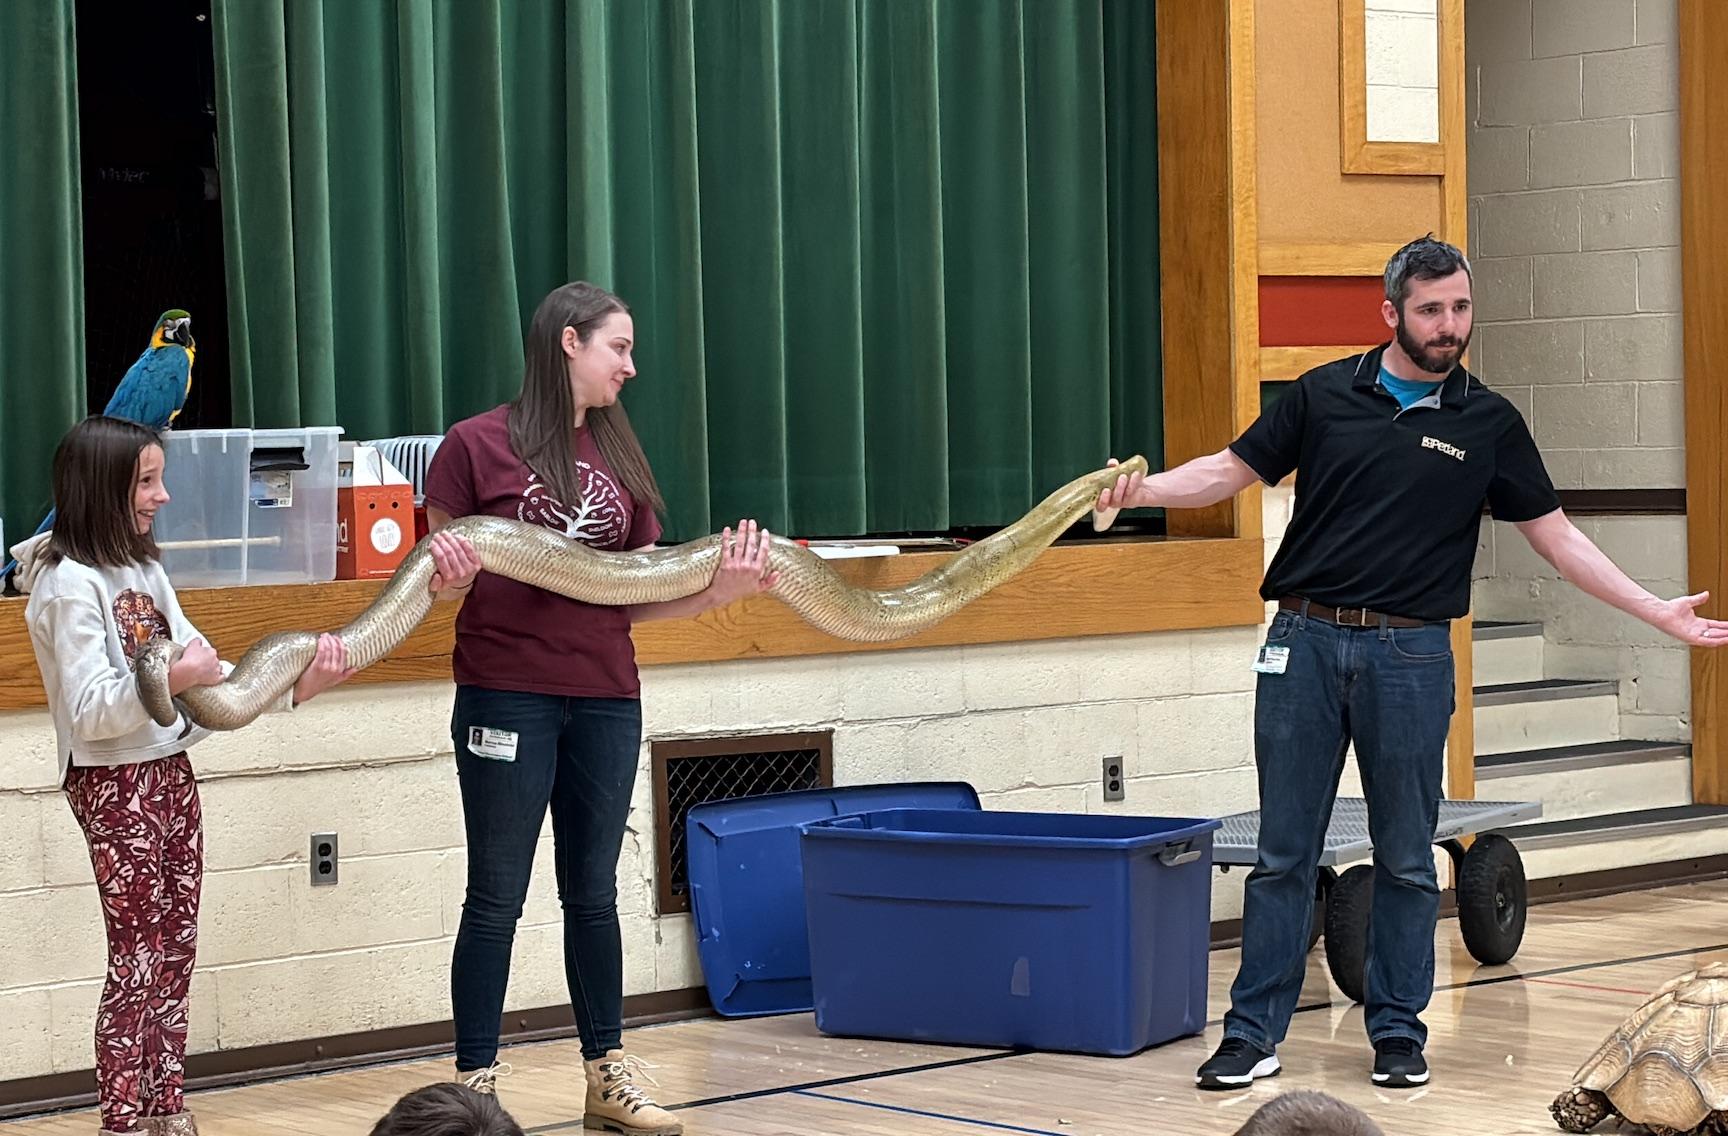 4th-grader Fiona Wassel joins Petland’s Taylor and Kurt to hold the giant python for the audience to see